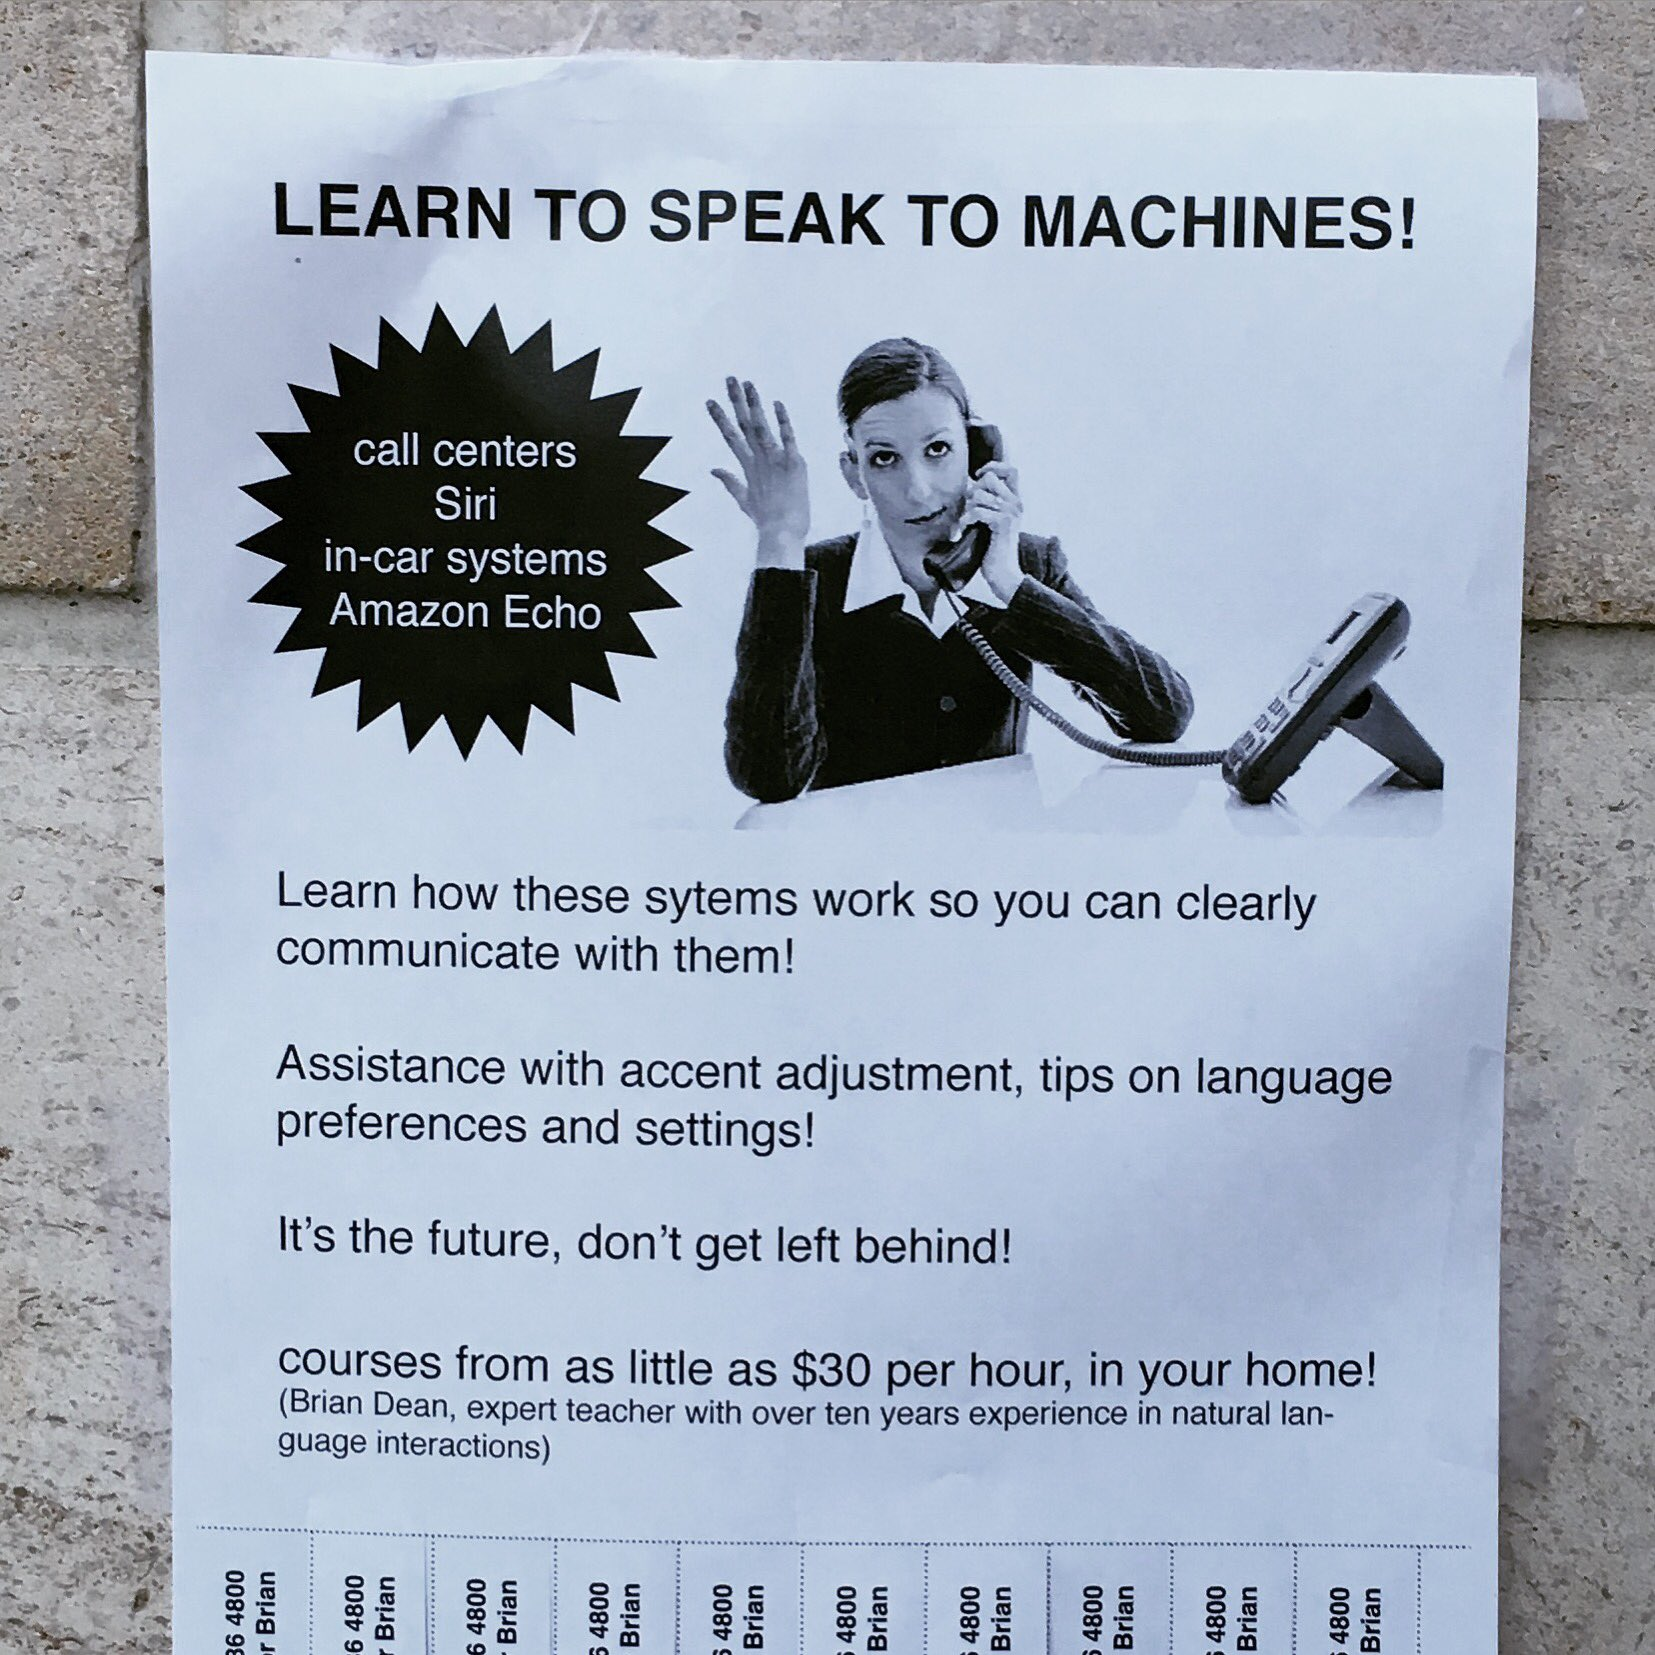 Bots! LEARN TO SPEAK TO MACHINES!  call centers  Siri  in-car systems  Amazon Echo  Learn how these sytems work so you can clearly communicate with them!  Assistance with accent adjustment, tips on language  preferences and settings!  It's the future, don't get left behind!  courses from as little as $30 per hour, in your home!  (Brian Dean, expert teacher with over ten years experience in natural language interactions)